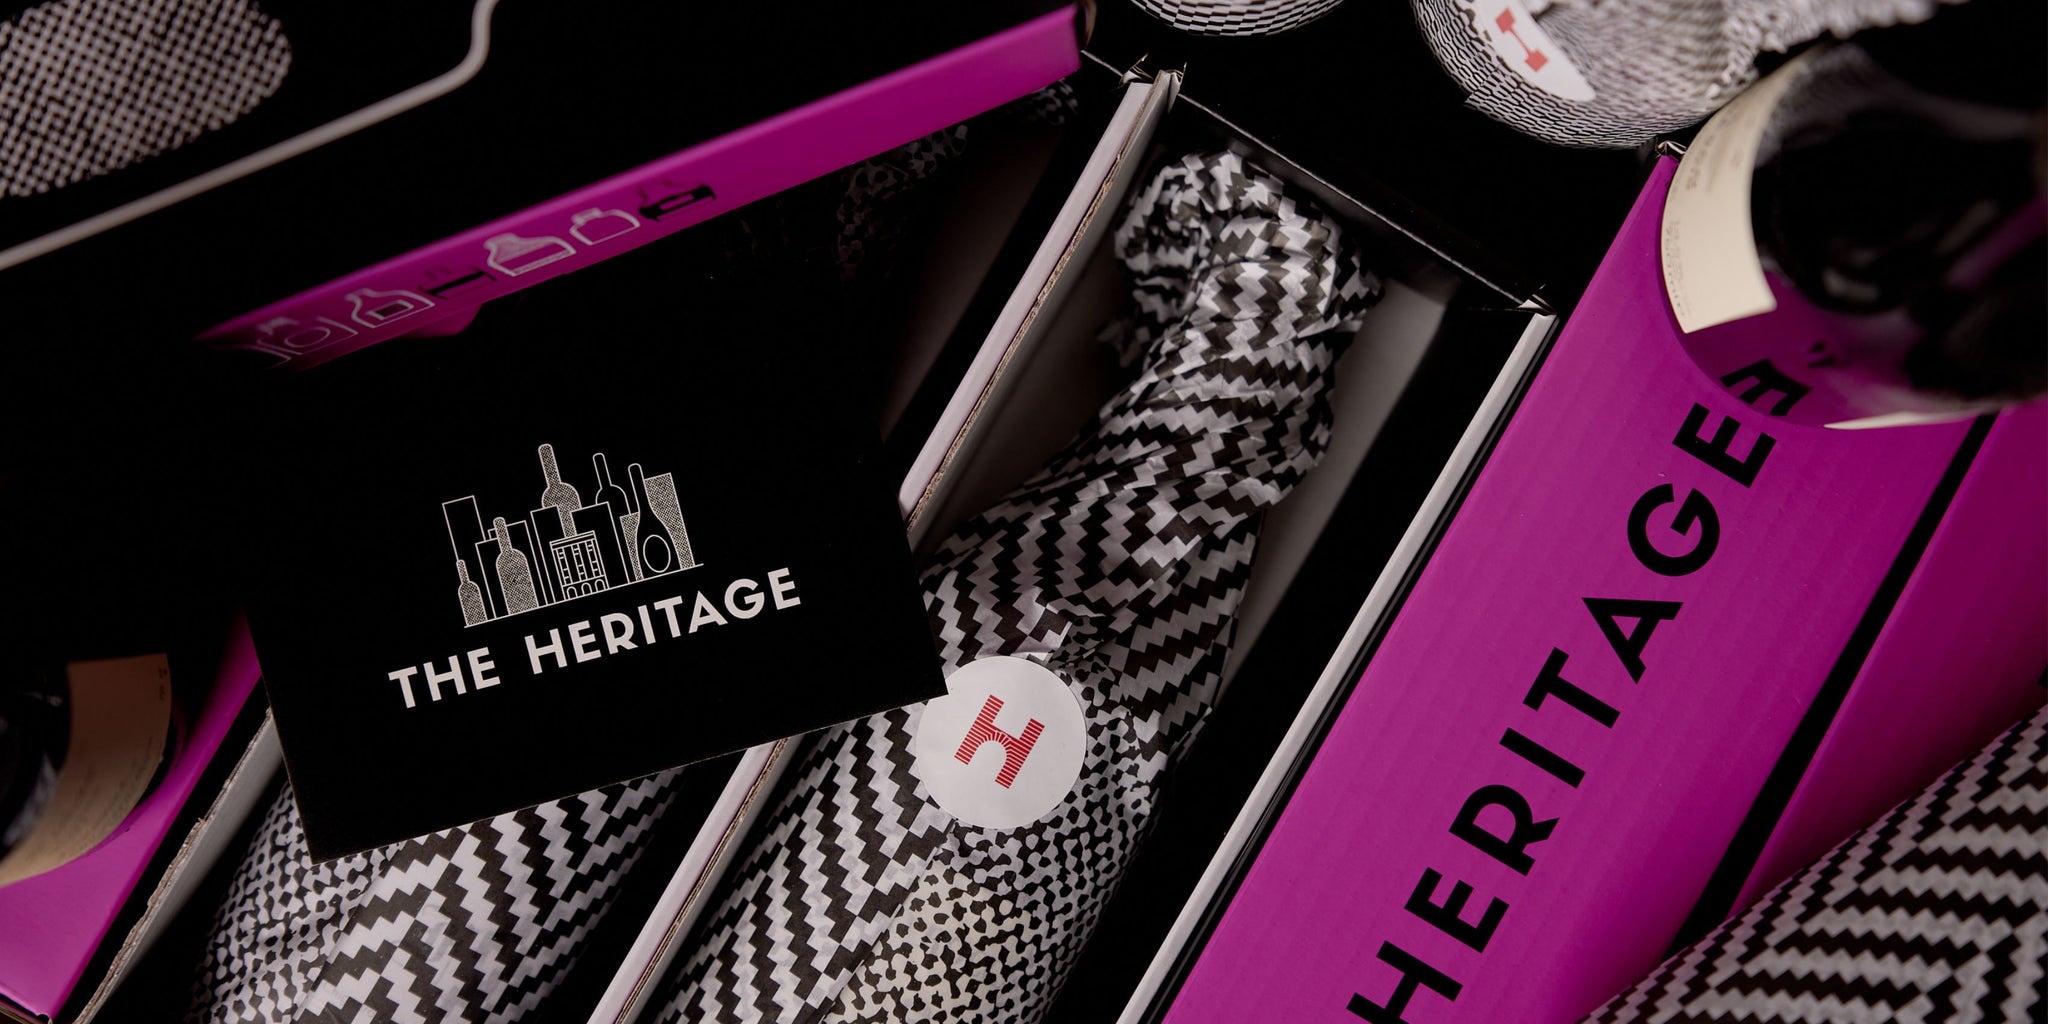 The Heritage Wine Store Corporate Wine Gifts. Delivery Australia wide. Premium and unique wine and Champagne selection with bespoke expert help choosing best corporate wine gifts for clients and employees